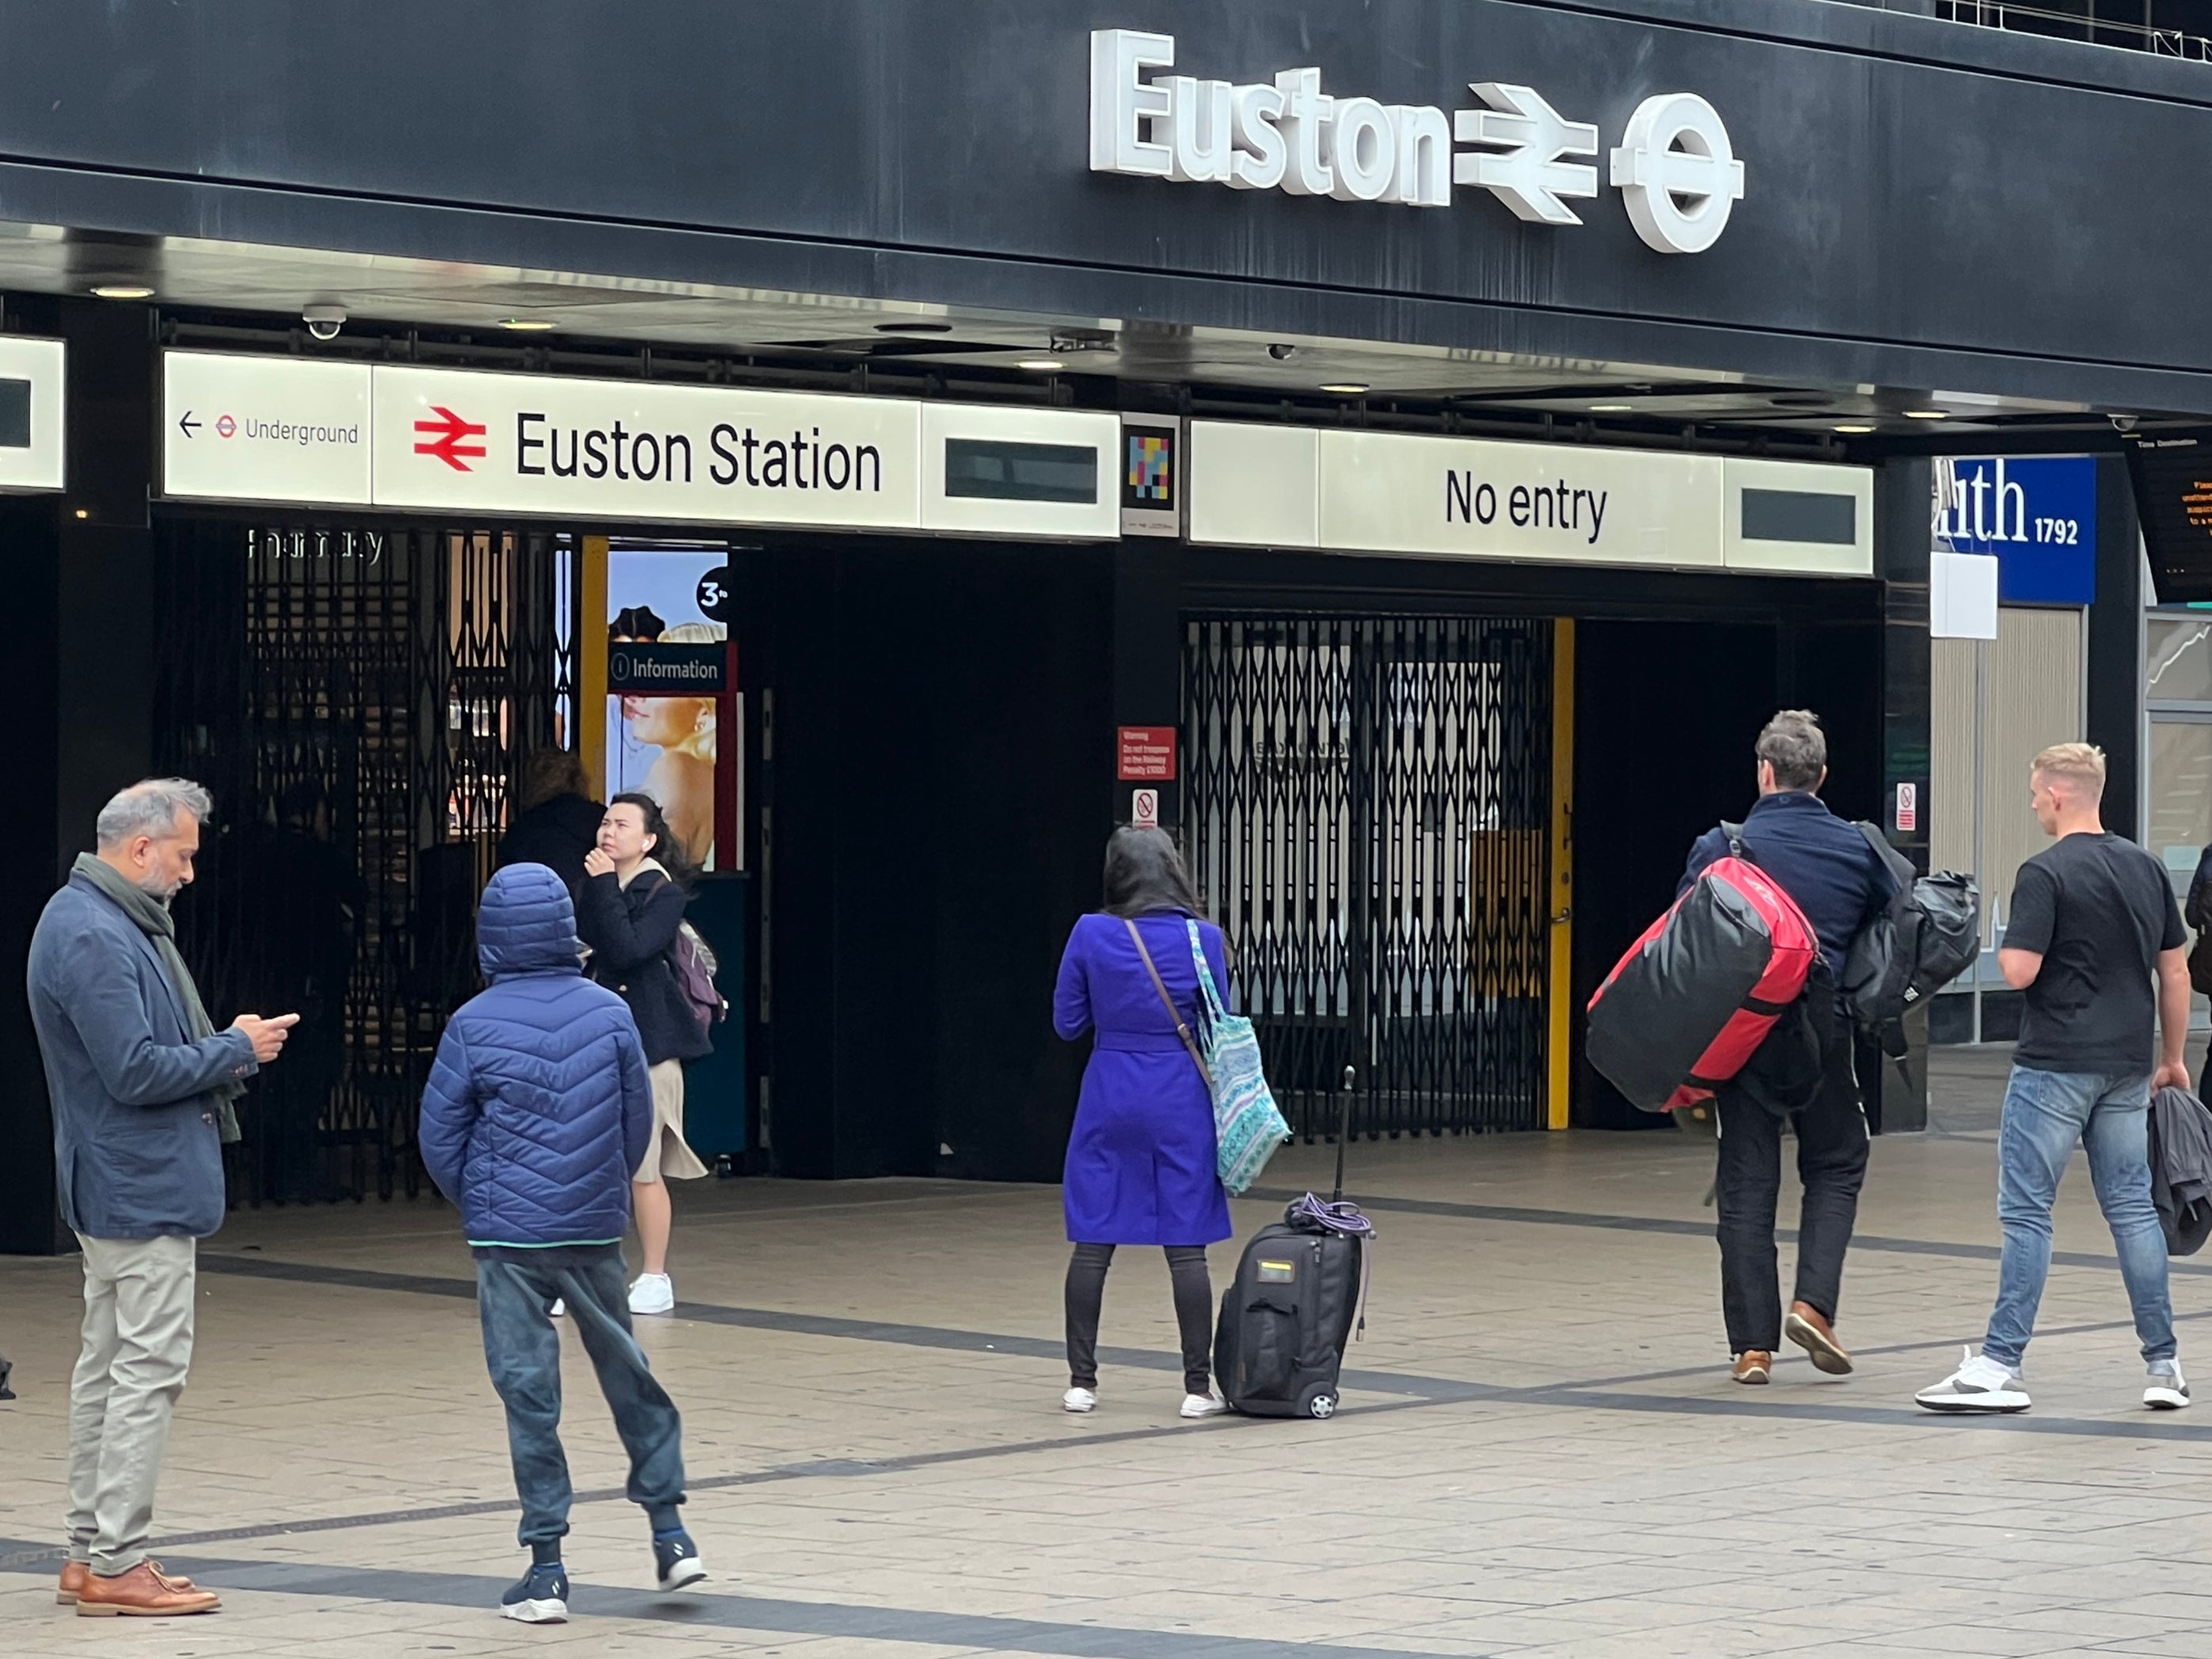 Stay put: Passengers outside London Euston station on the day of the previous drivers’ strike, 5 October 2022